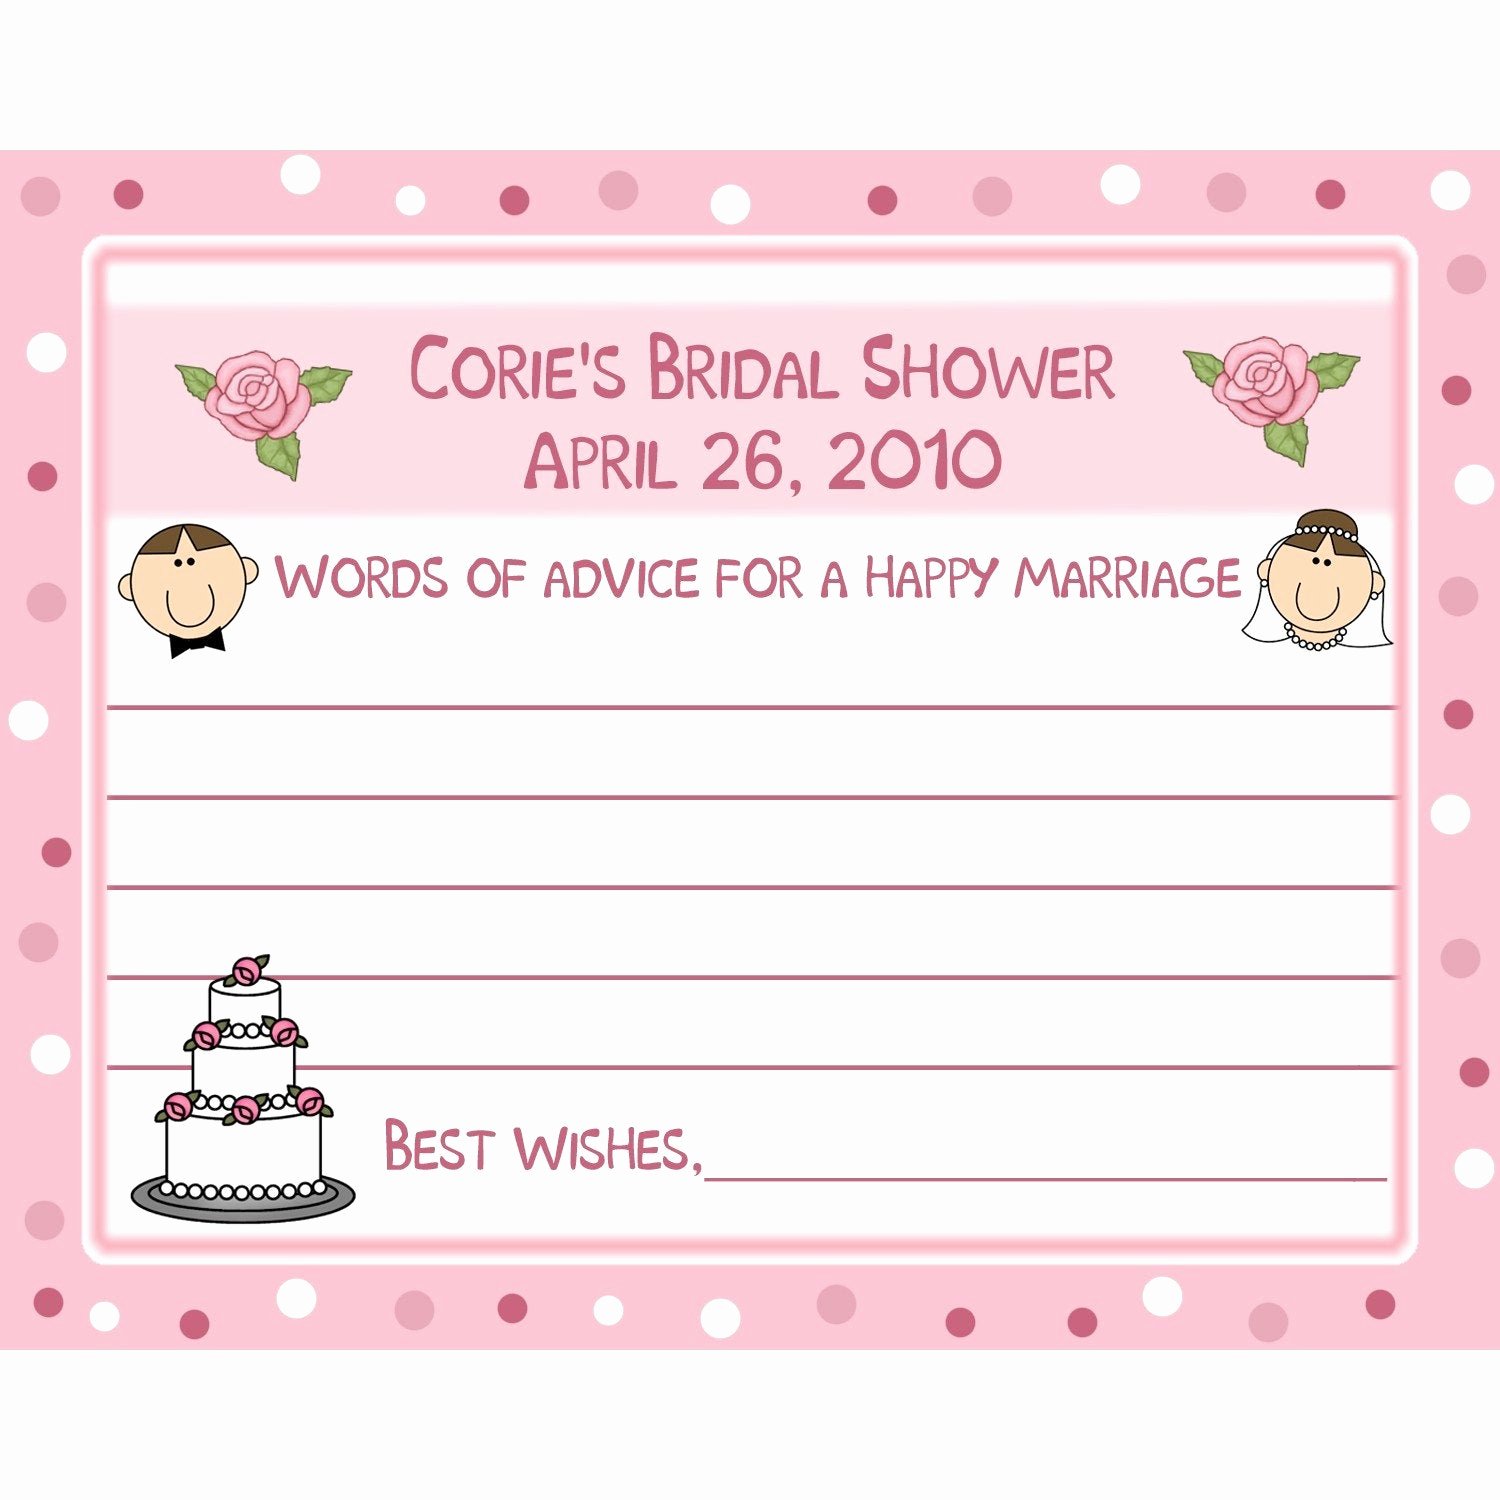 Bridal Shower Advice Cards New 24 Personalized Bridal Shower Advice Cards Bride by Partyplace